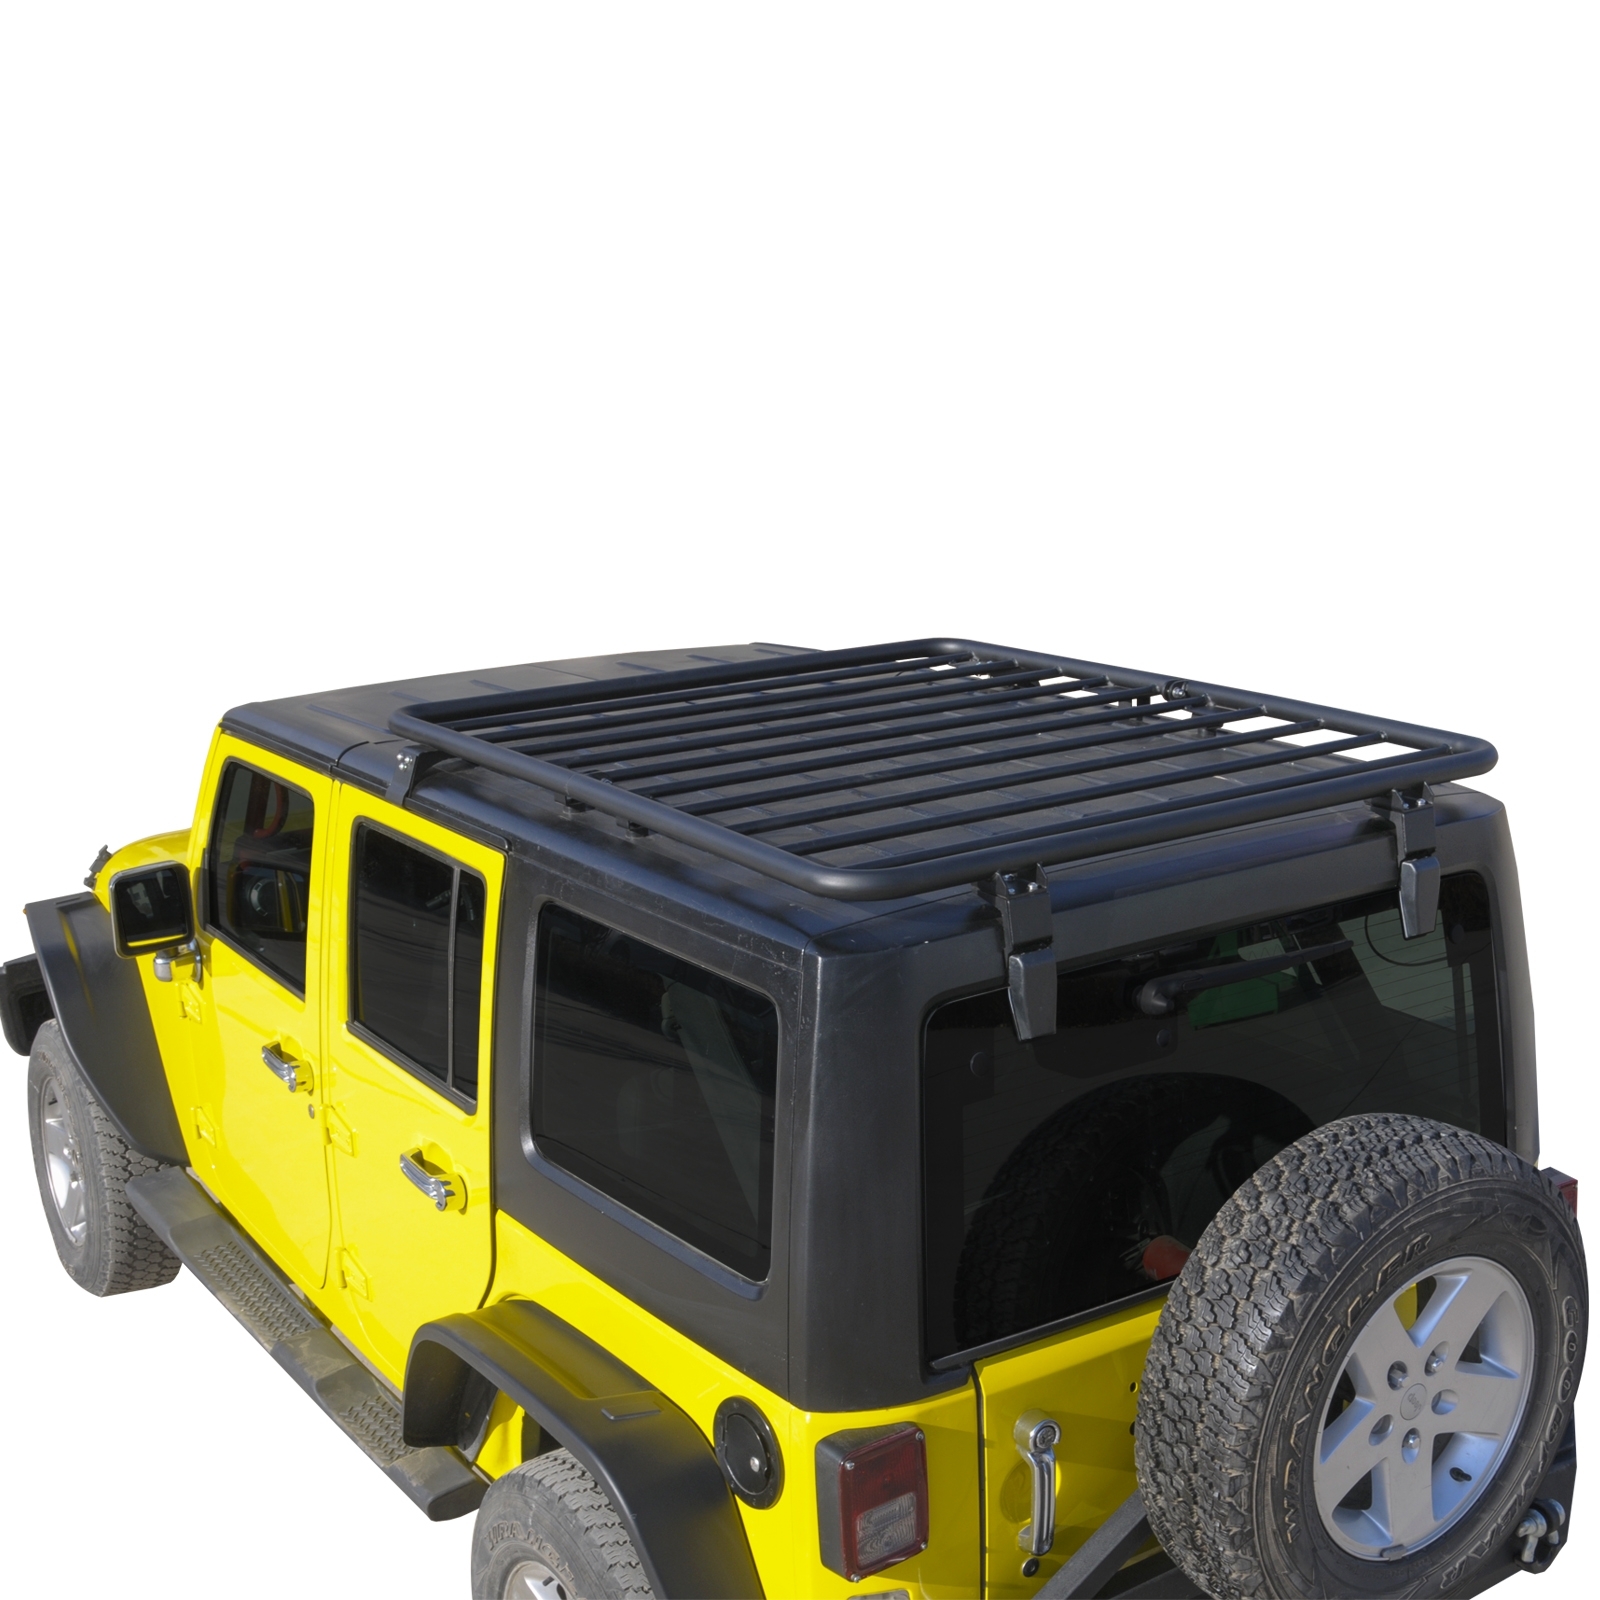 Paramount Flat Roof Rack for 07-18 Jeep Wrangler JK | Best Prices & Reviews  at Morris 4x4